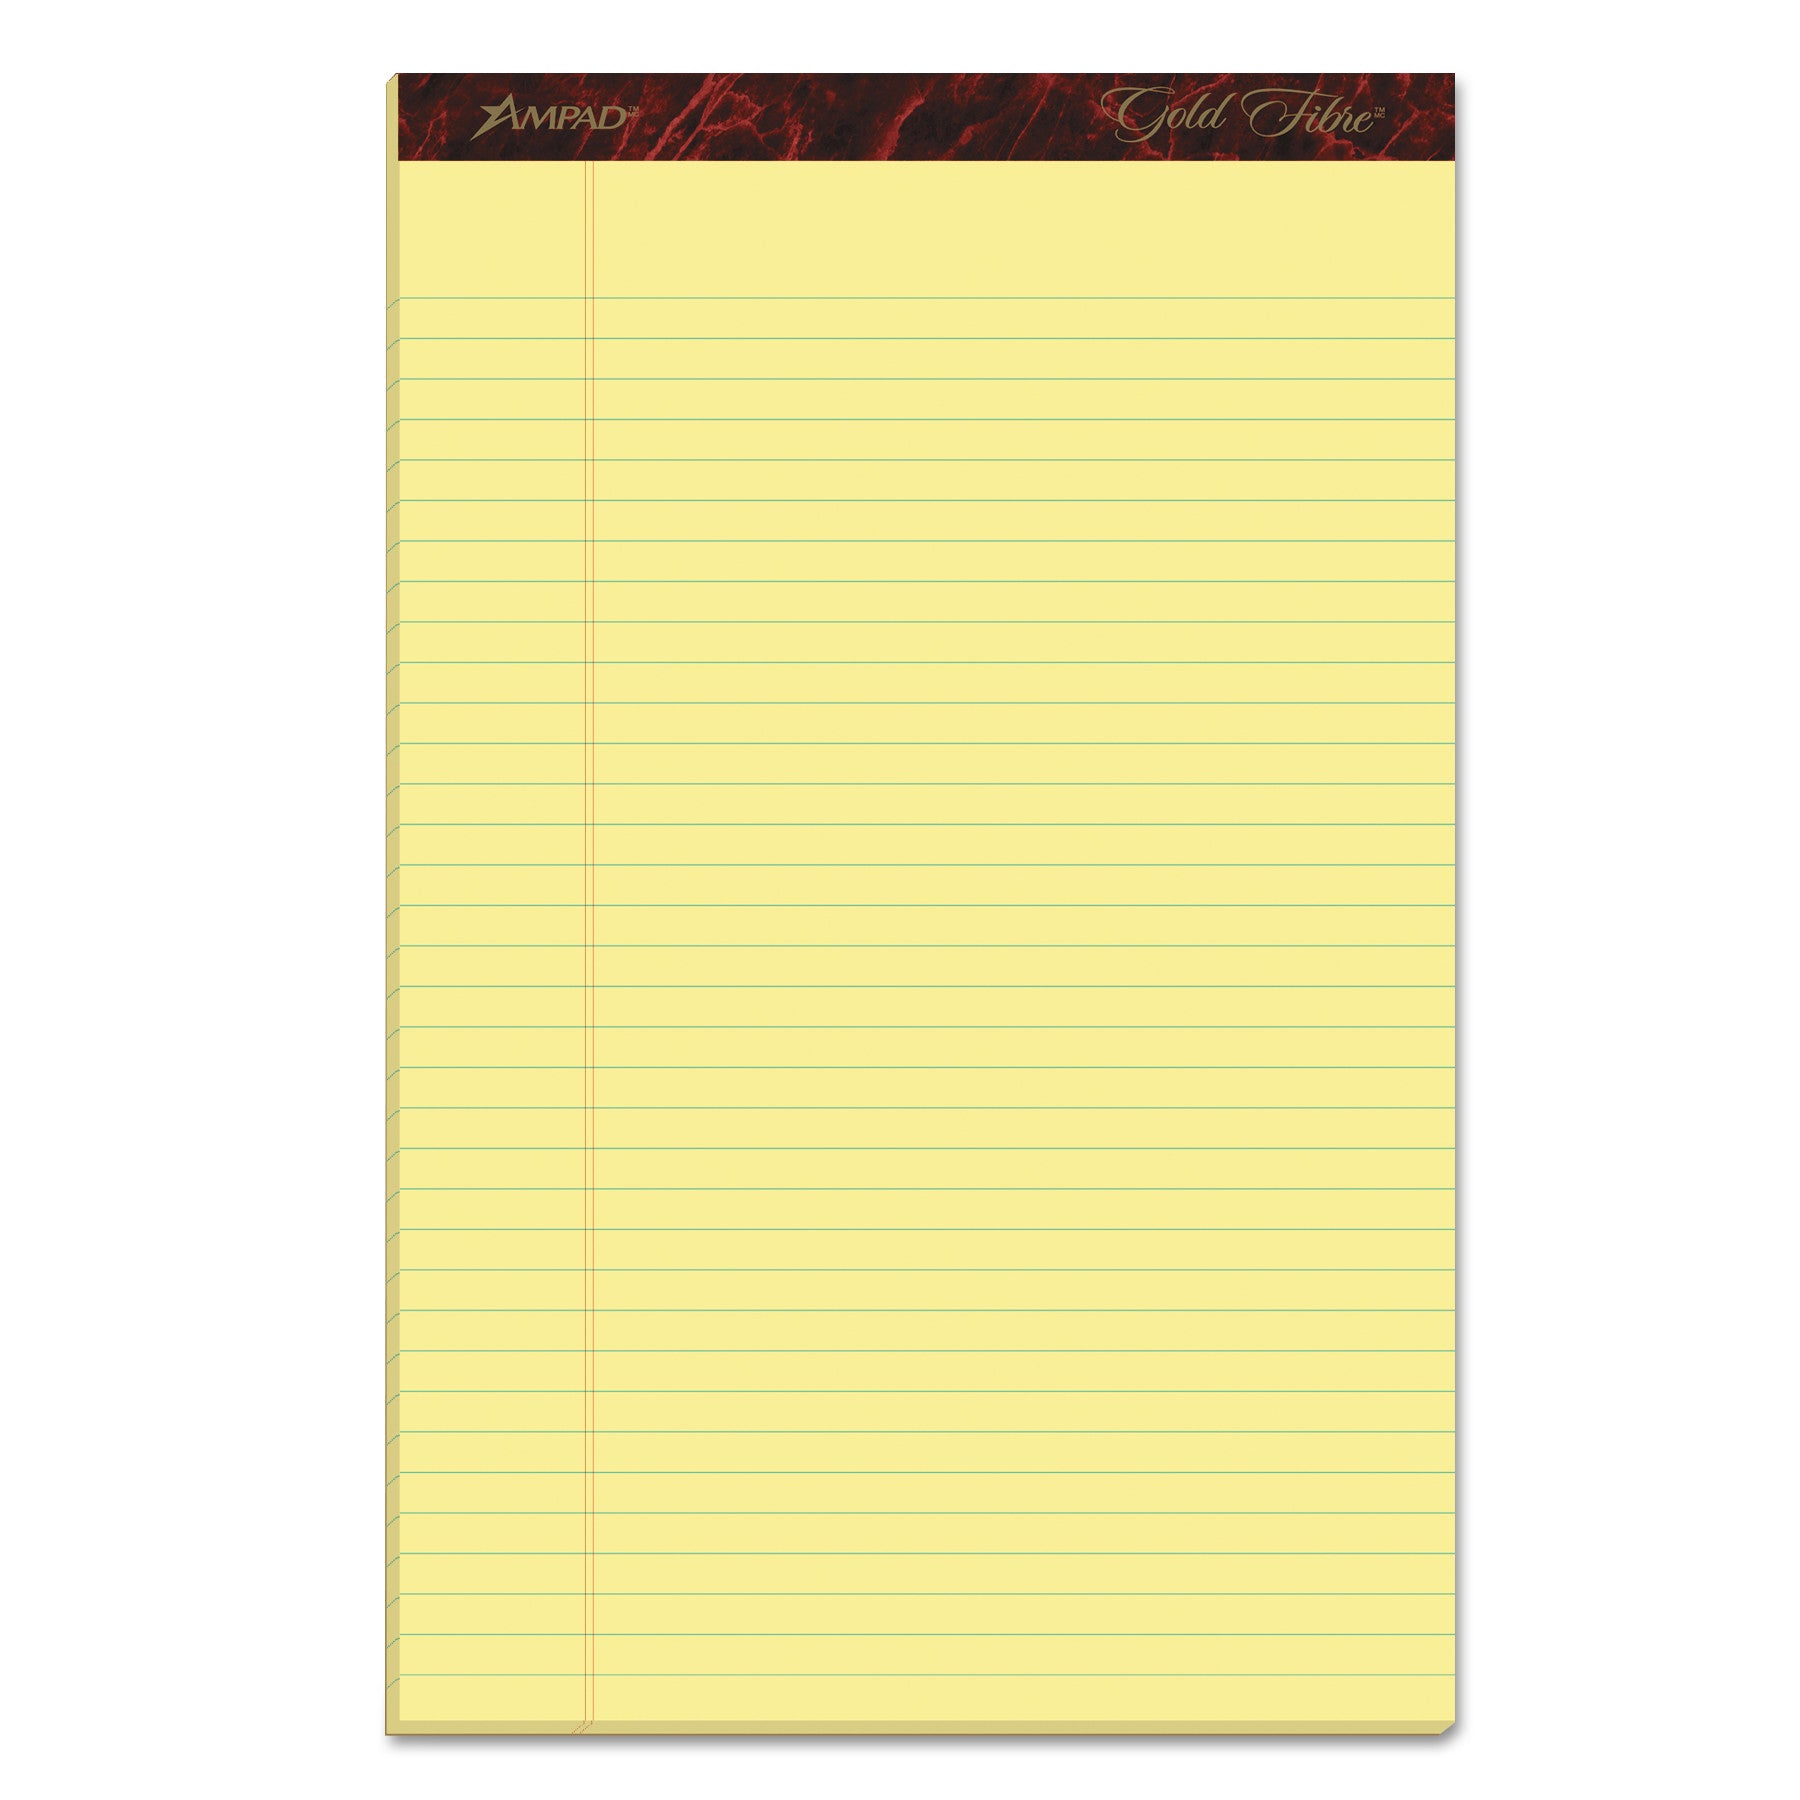 Gold Fibre Quality Writing Pads, Wide/Legal Rule, 50 Canary-Yellow 8.5 x 14 Sheets, Dozen - 